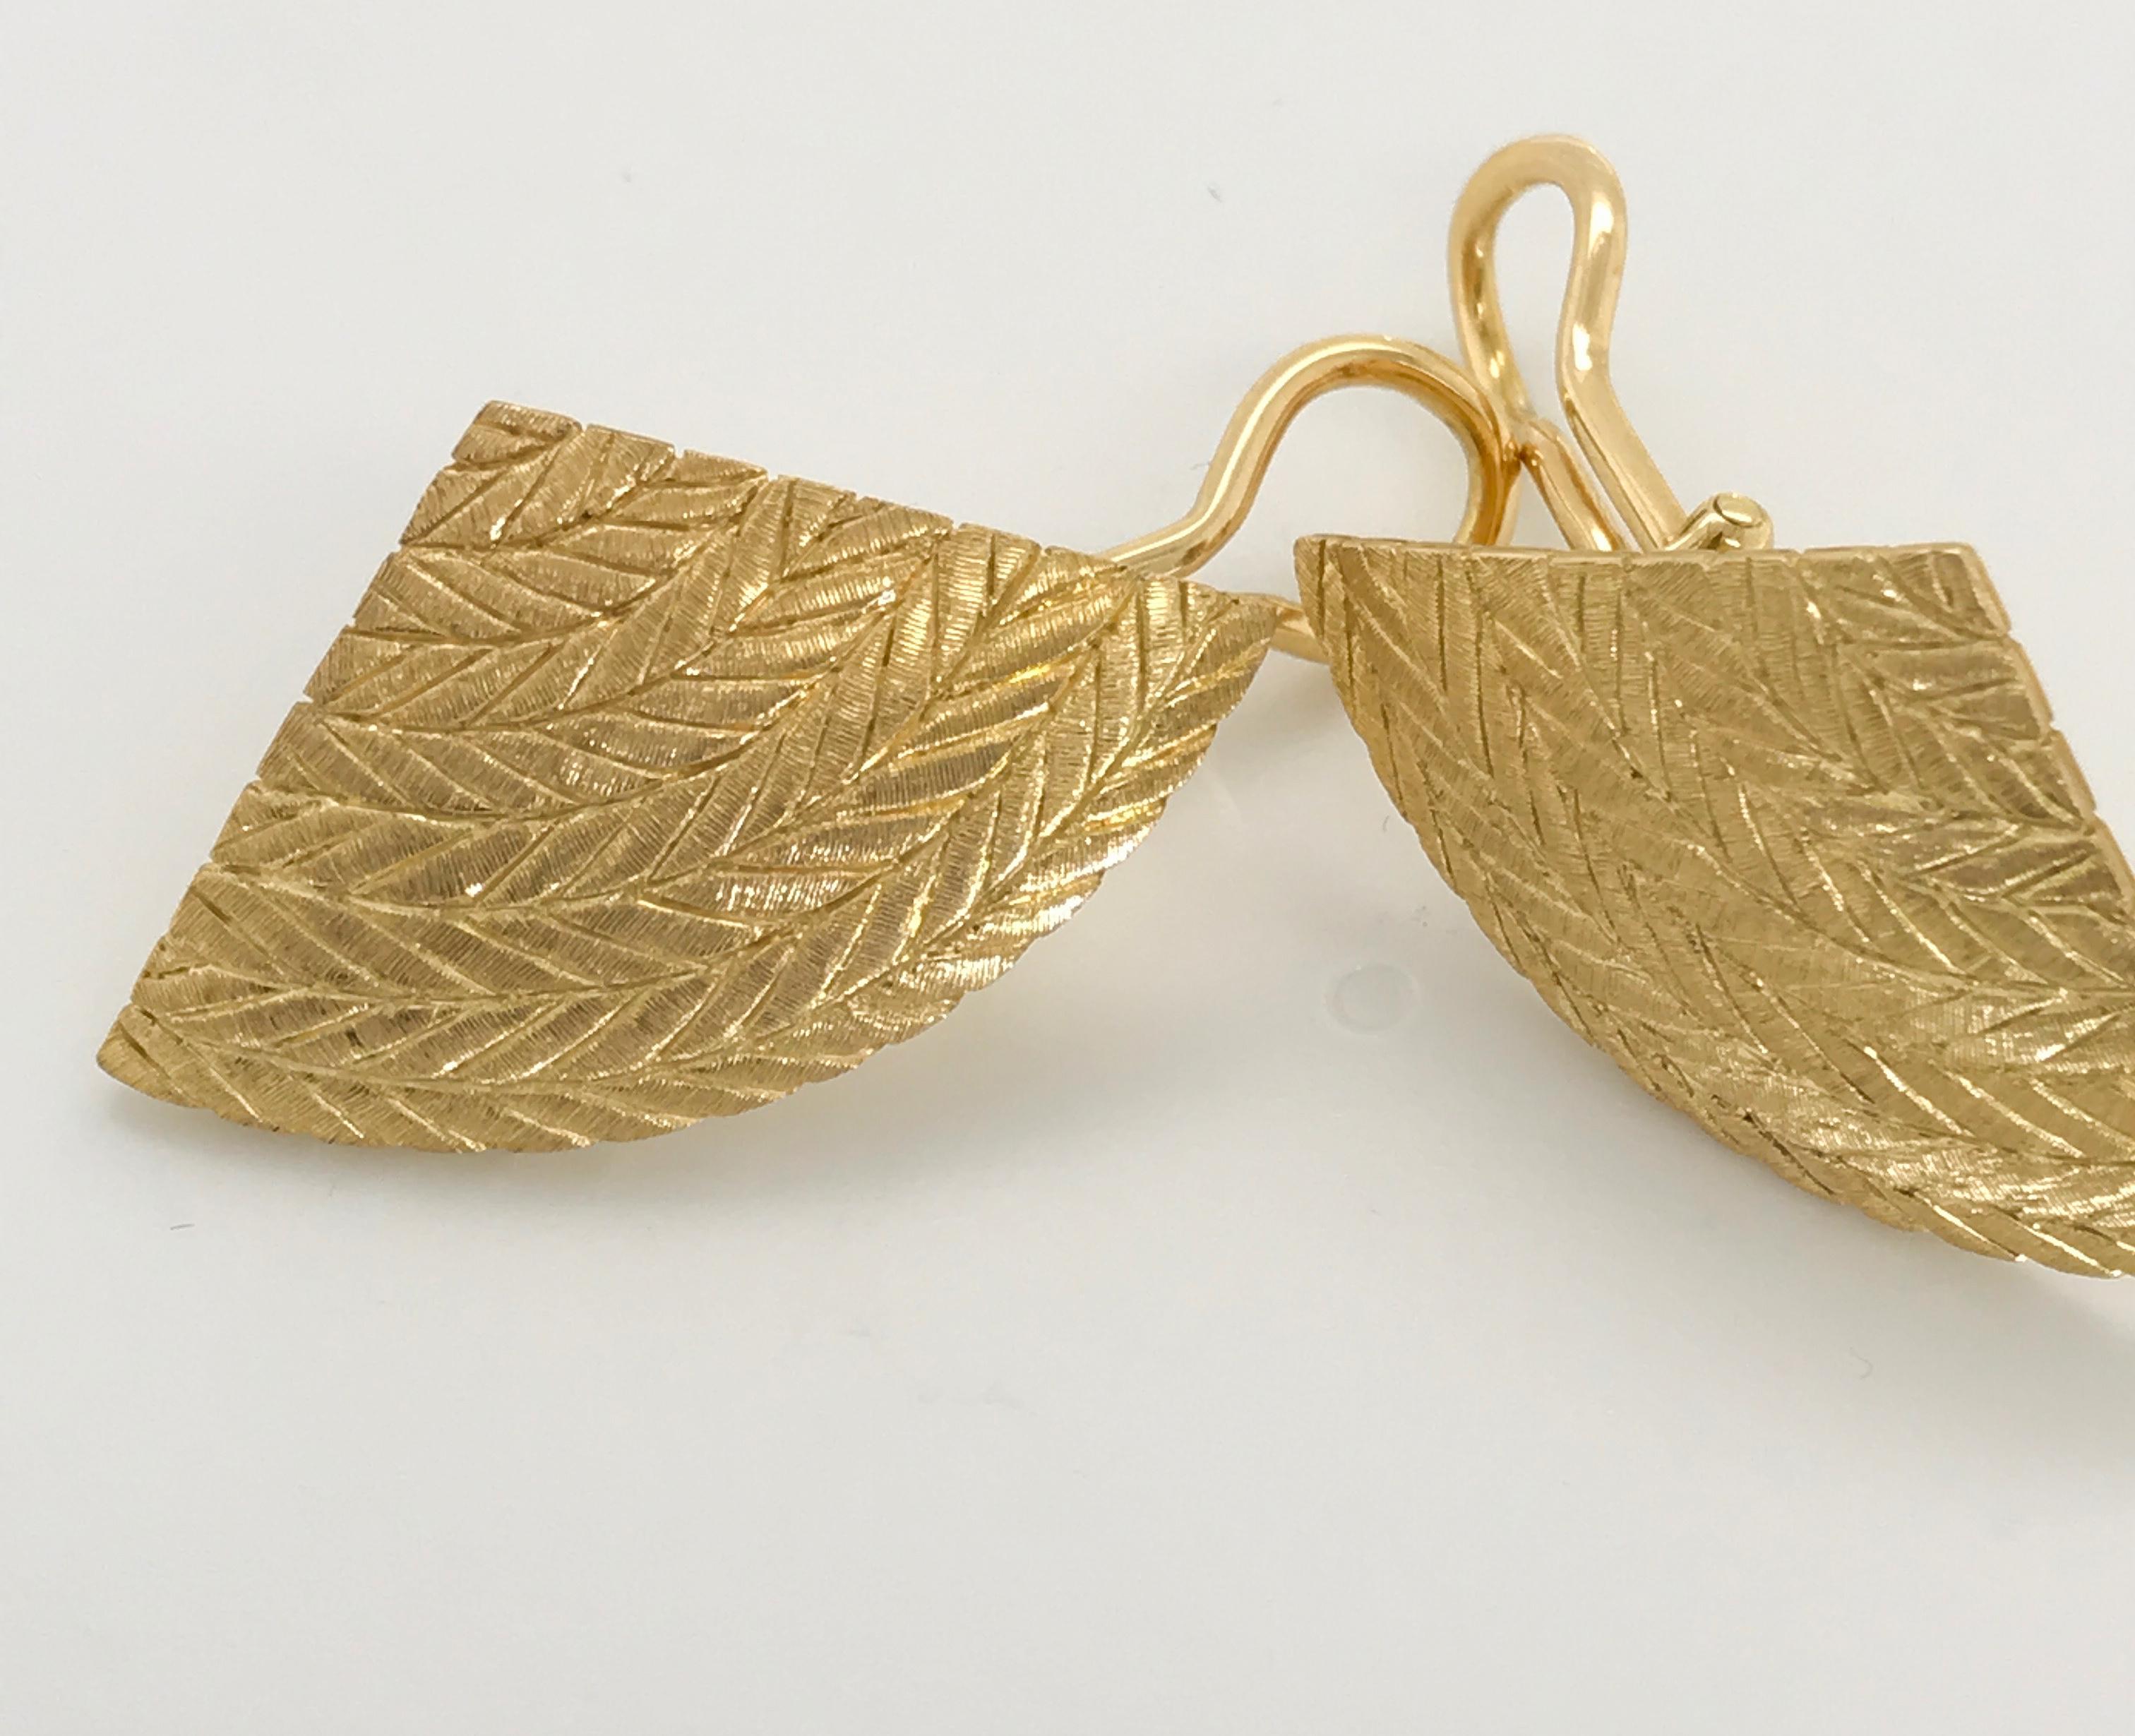 Such a timeless style, elegant and so sophisticated of course they're Buccellati. Impressive goldsmiths their craftsmanship is second to none and these earrings are no exception. Beautifully detailed engraving work to the front of these fan shaped